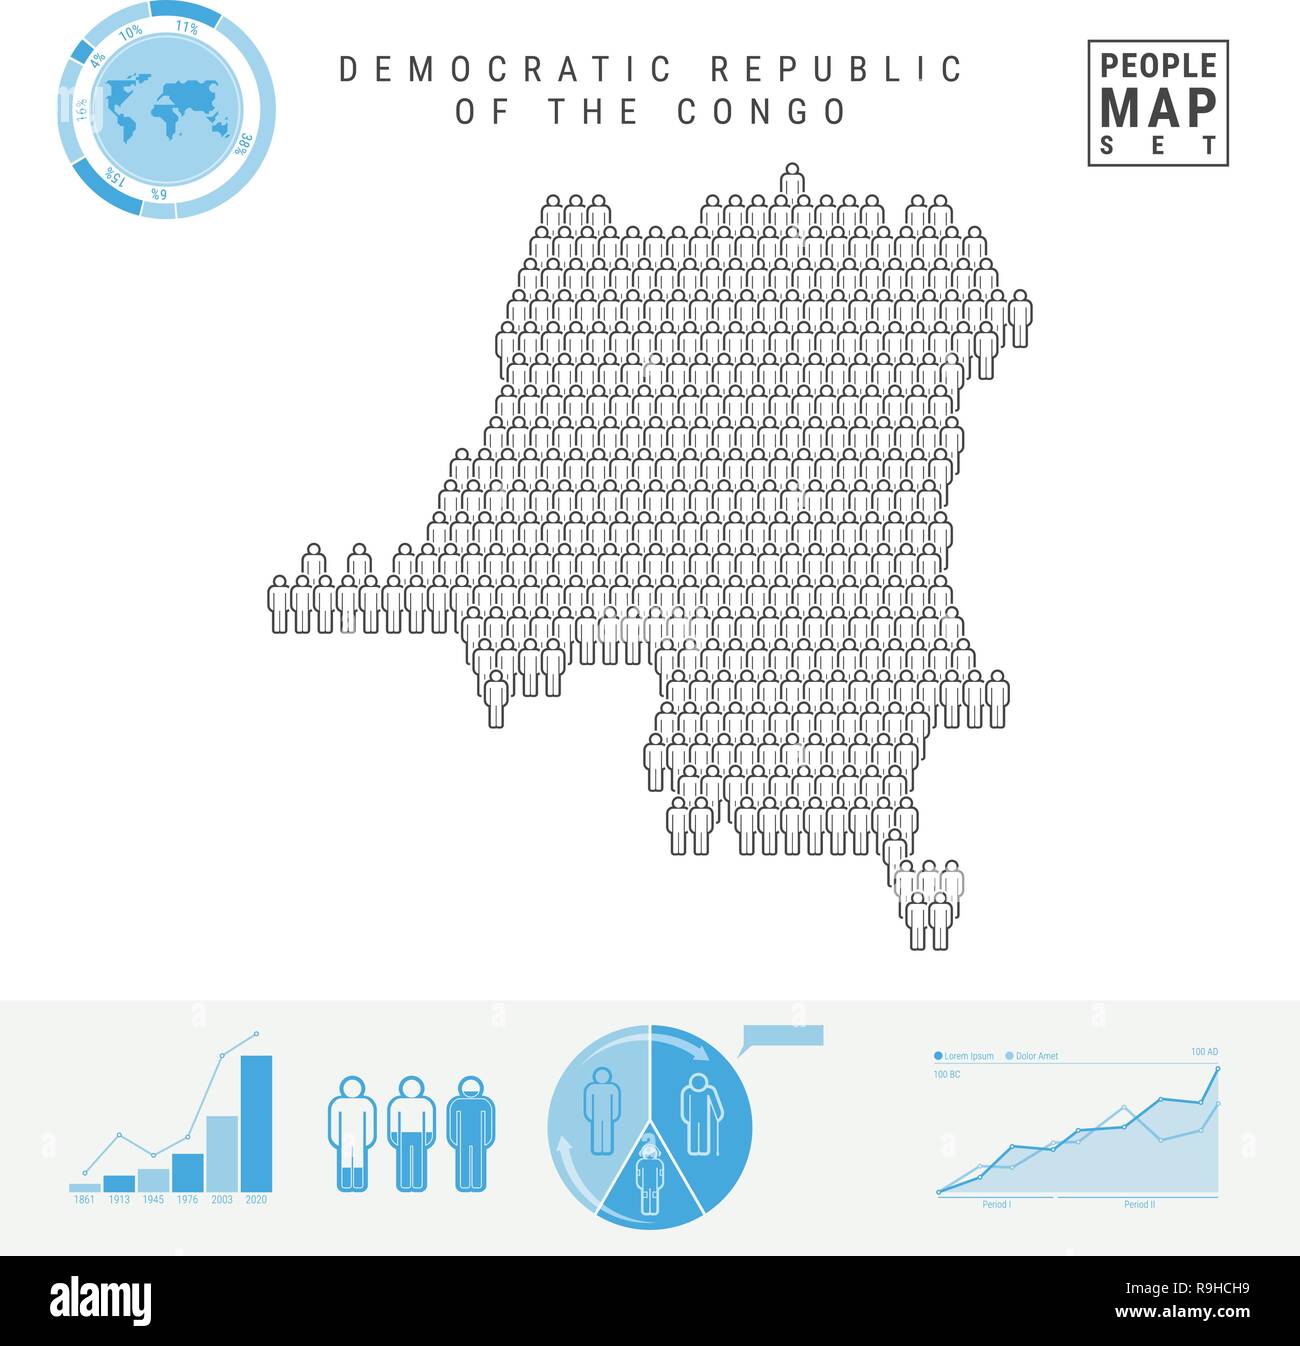 Democratic Republic of the Congo People Icon Map. People Crowd in the Shape of a Map of DR Congo. Stylized Silhouette. Population Growth and Aging Inf Stock Vector